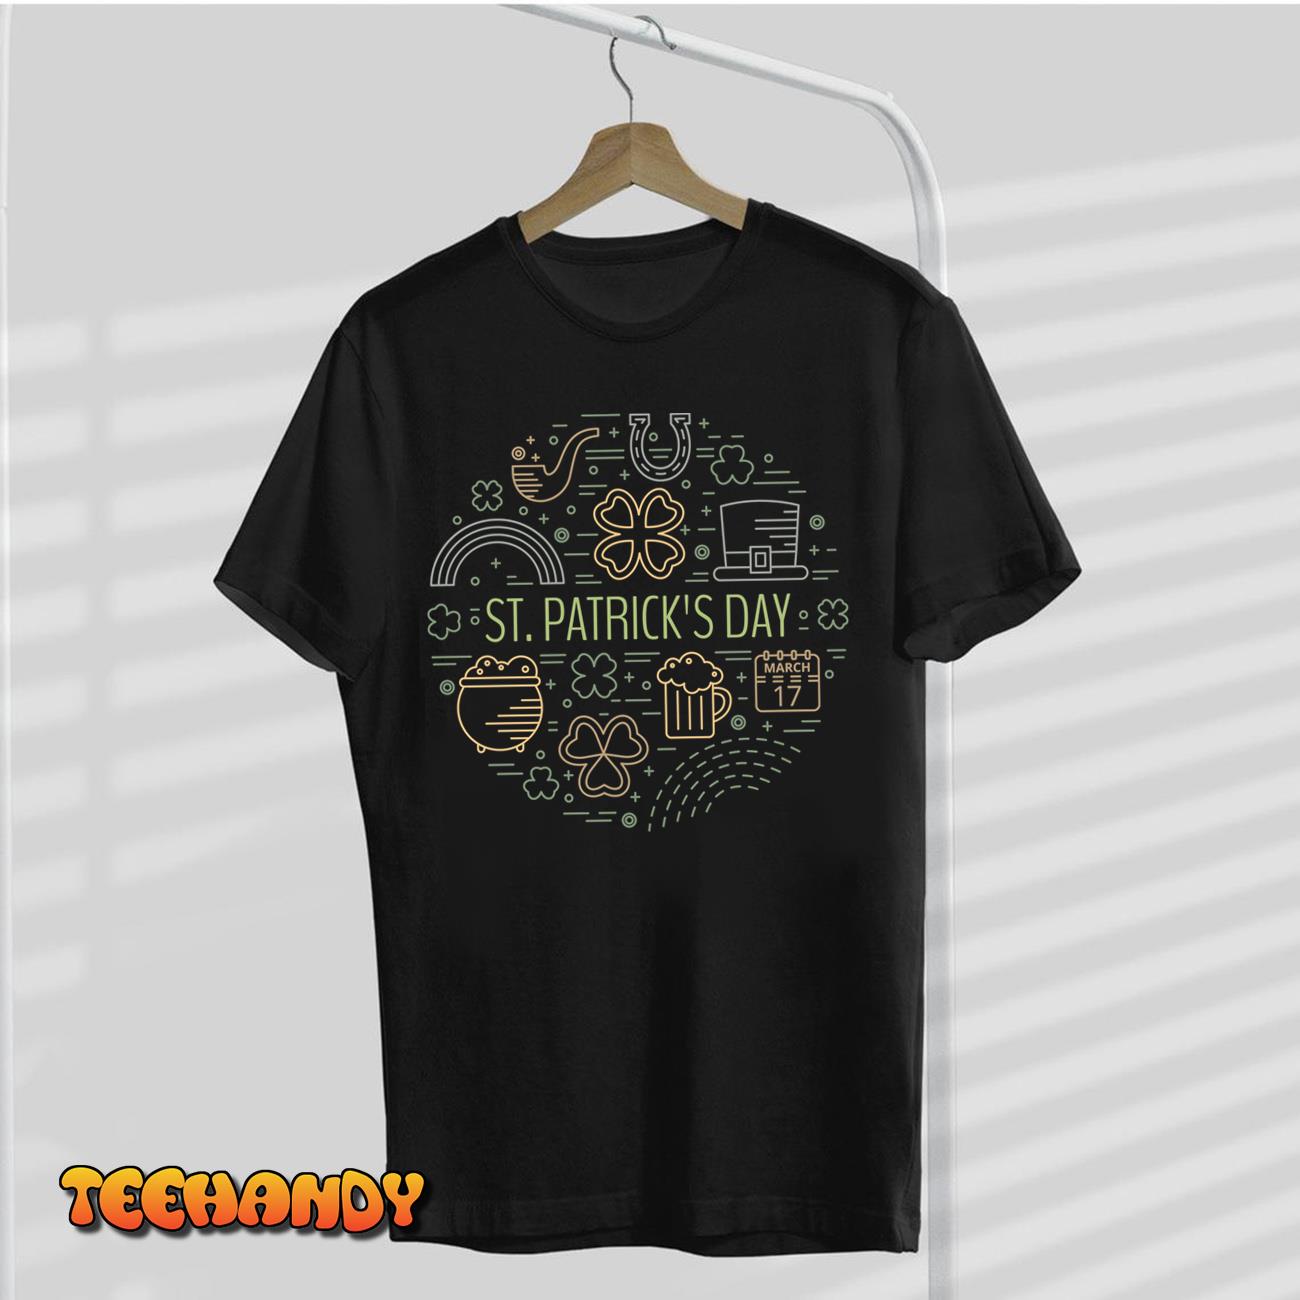 St. Patrick’s Day March 17 Unisex T-Shirt